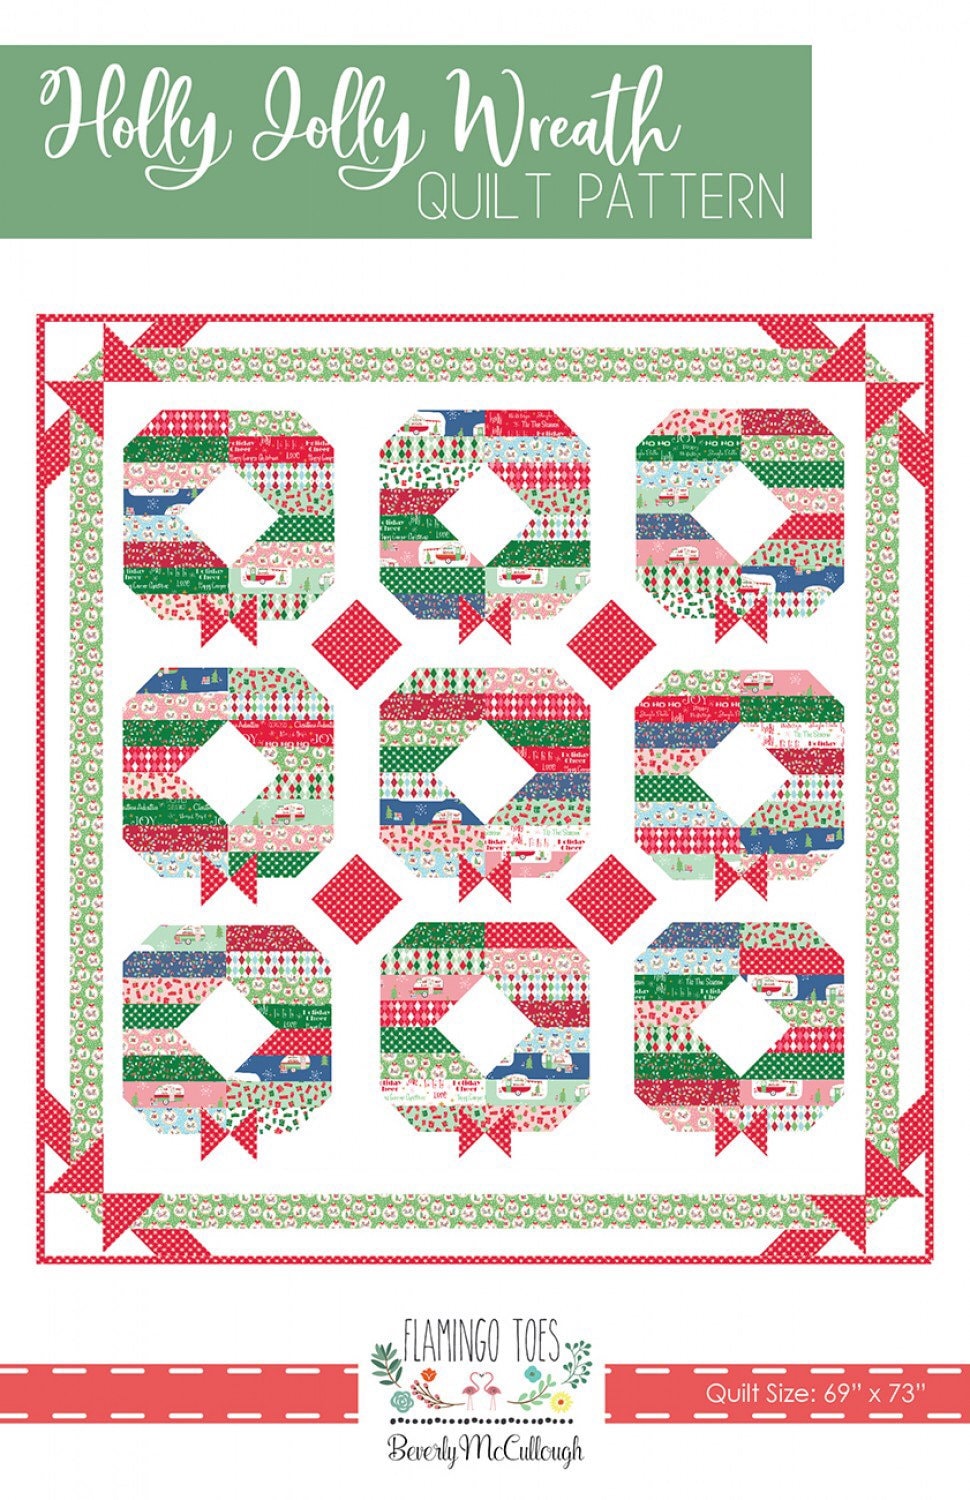 Holly Jolly Wreath Quilt Pattern - Christmas Adventure Fabric - Beverly McCullough - Flamingo Toes - Jelly Roll Friendly - Finishes at 69x73